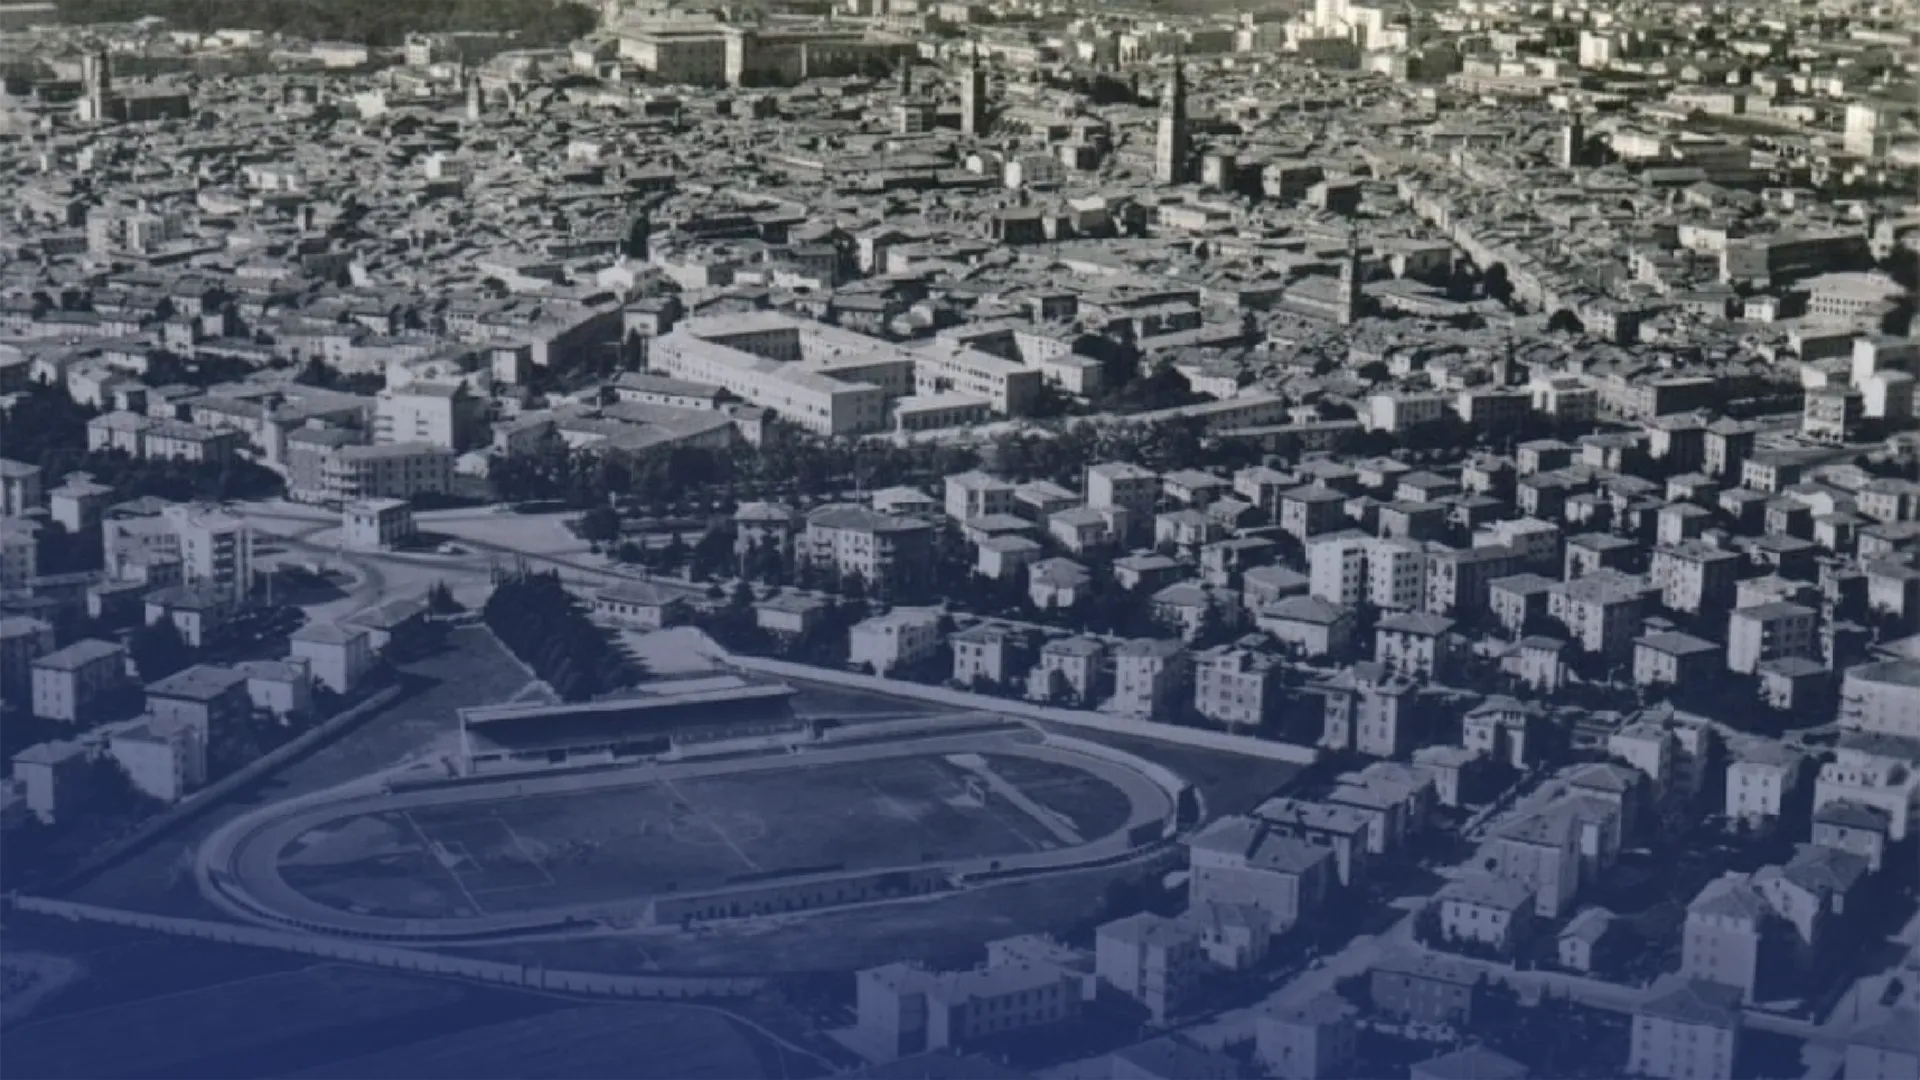 the stadio in the past